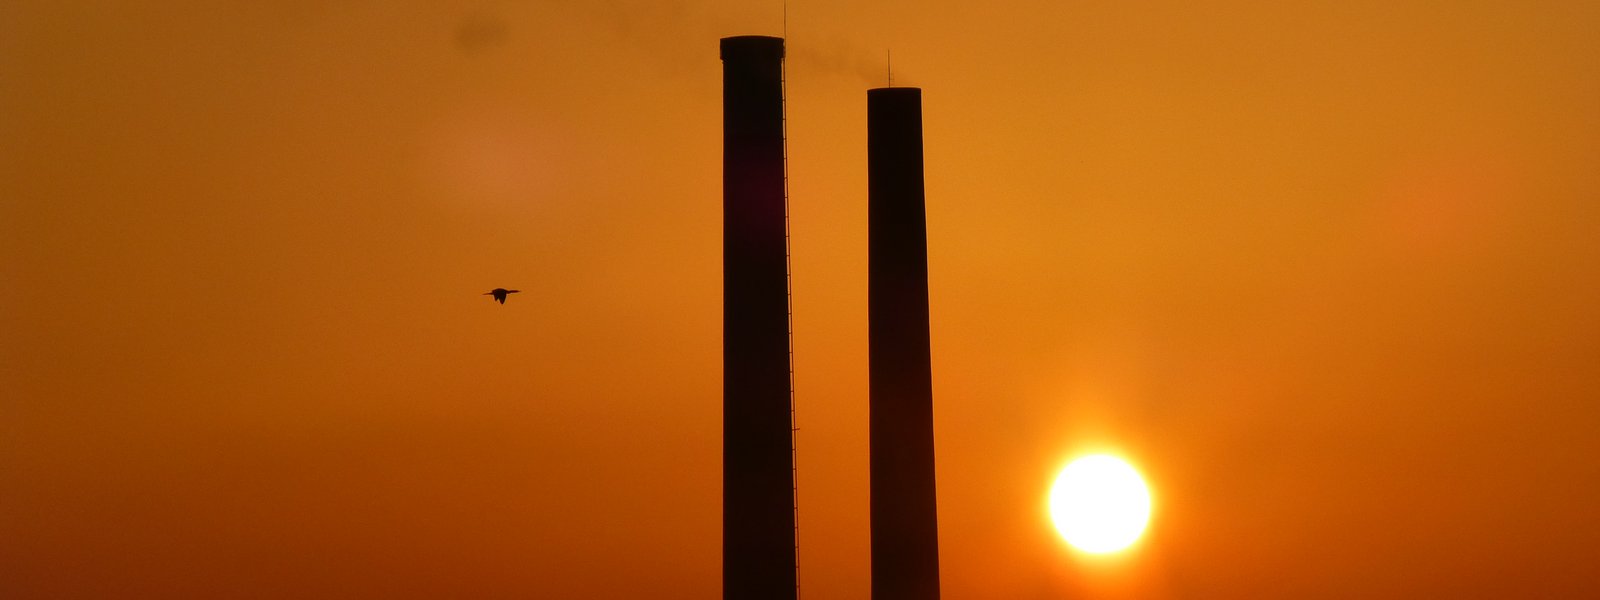 Silhouette of two smoking chimneys and a bird in flight agains a deep orange sunset sky with a low sun